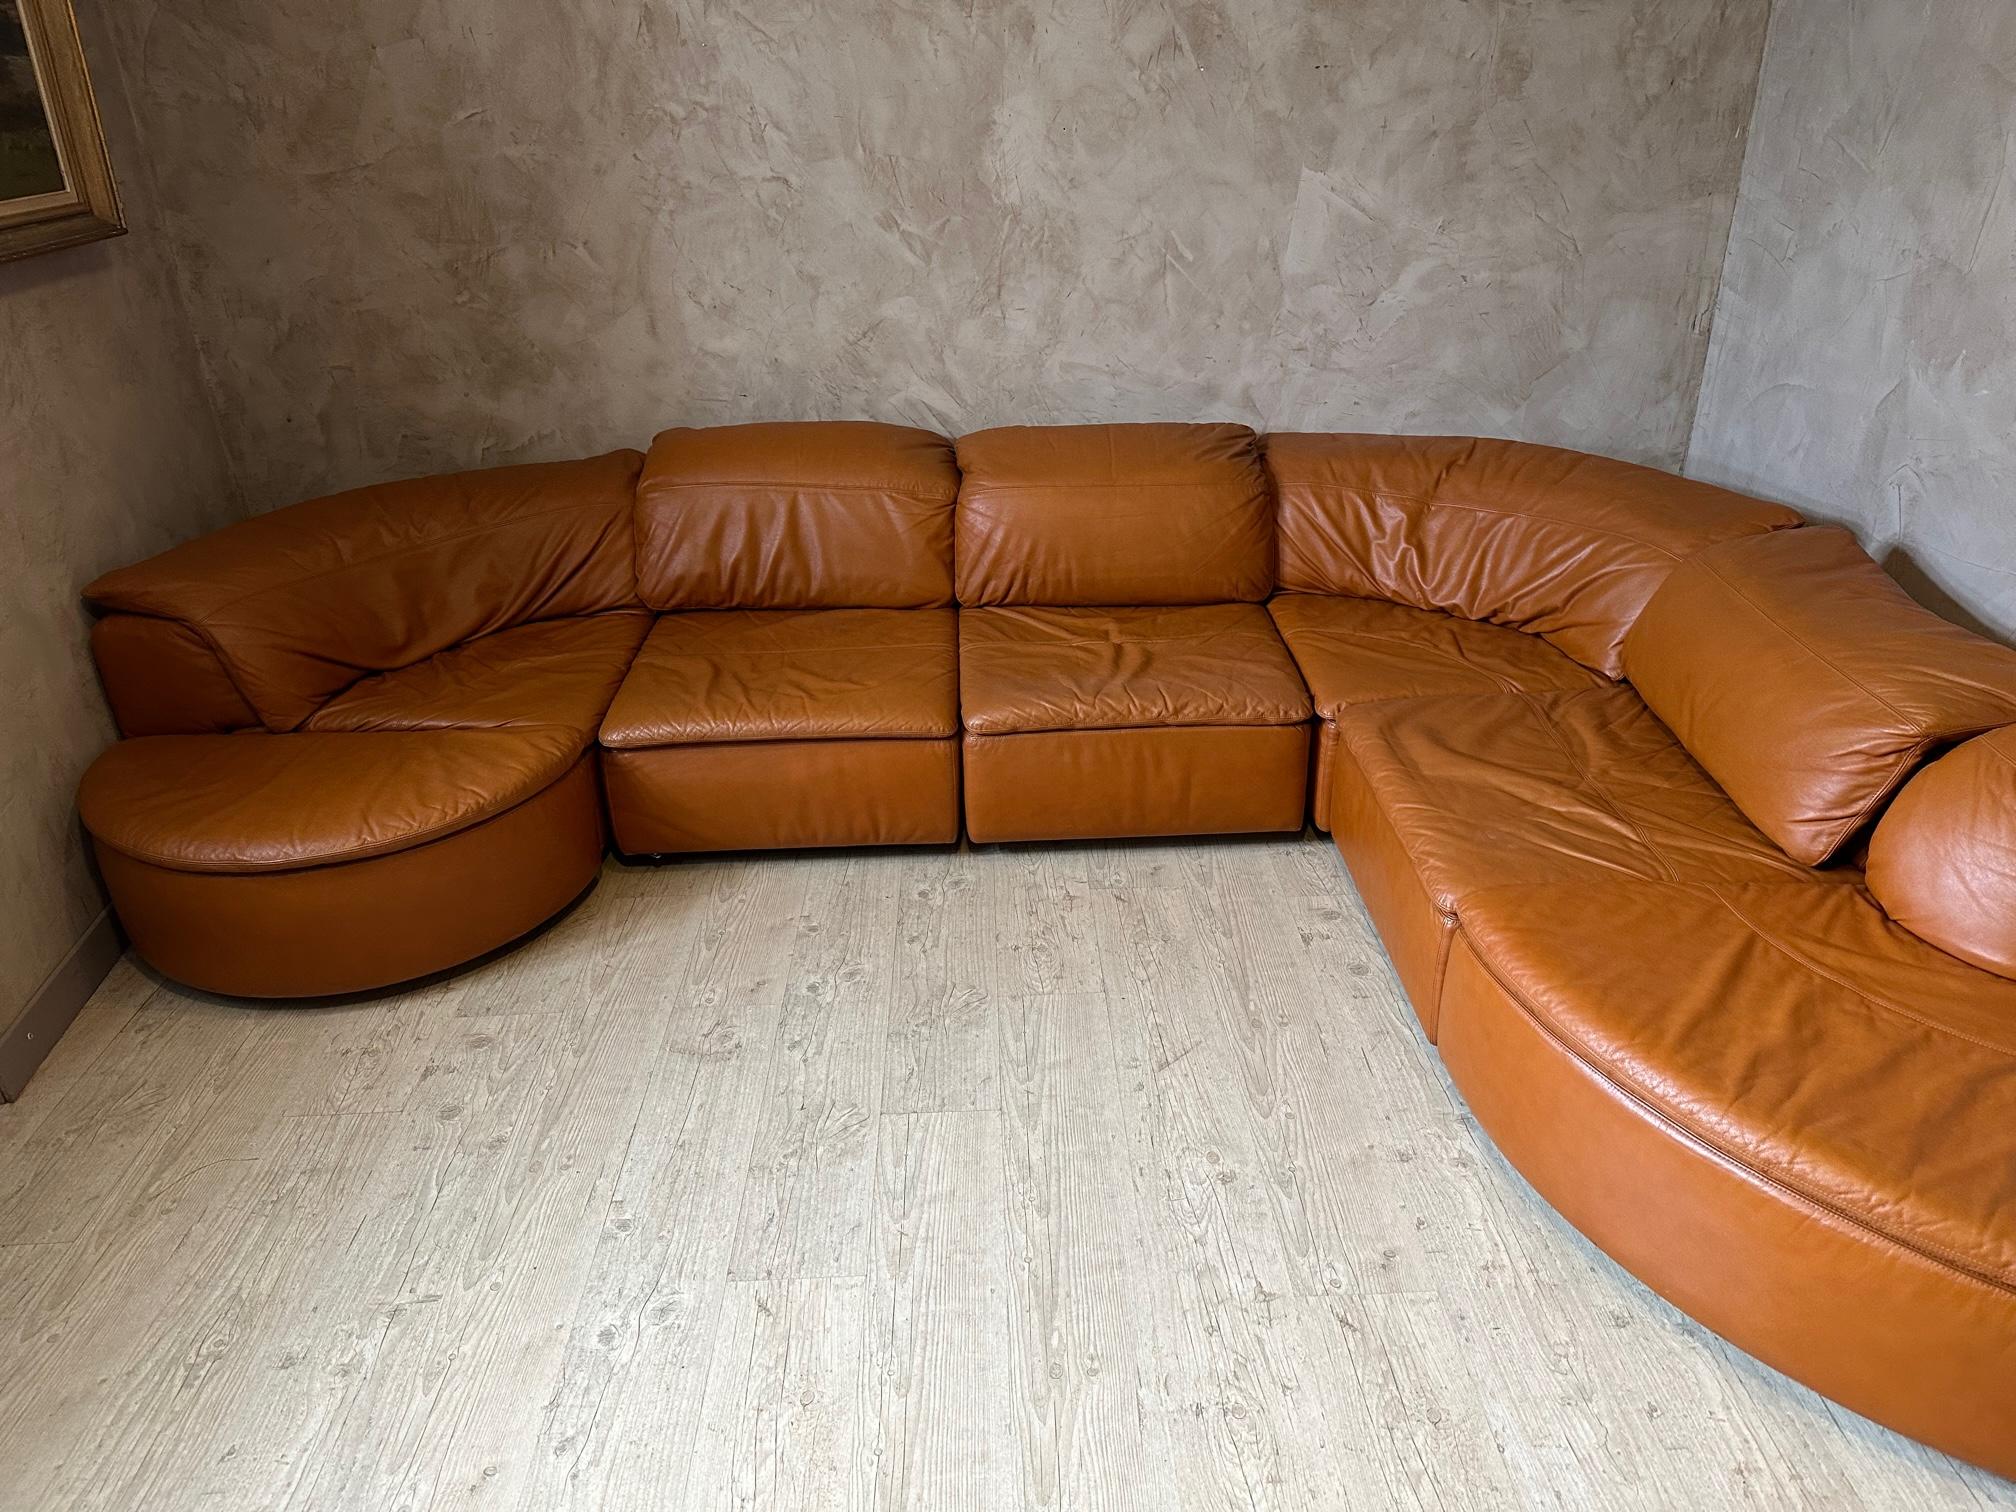 Magnificent camel leather sofa from the 70s designed by Laauser (German brand).
Fully modular, composed of 7 elements. Rounded shape, very elegant.
Three straight and 4 rounded elements.
To compose at your convenience. In good condition.
Unique and